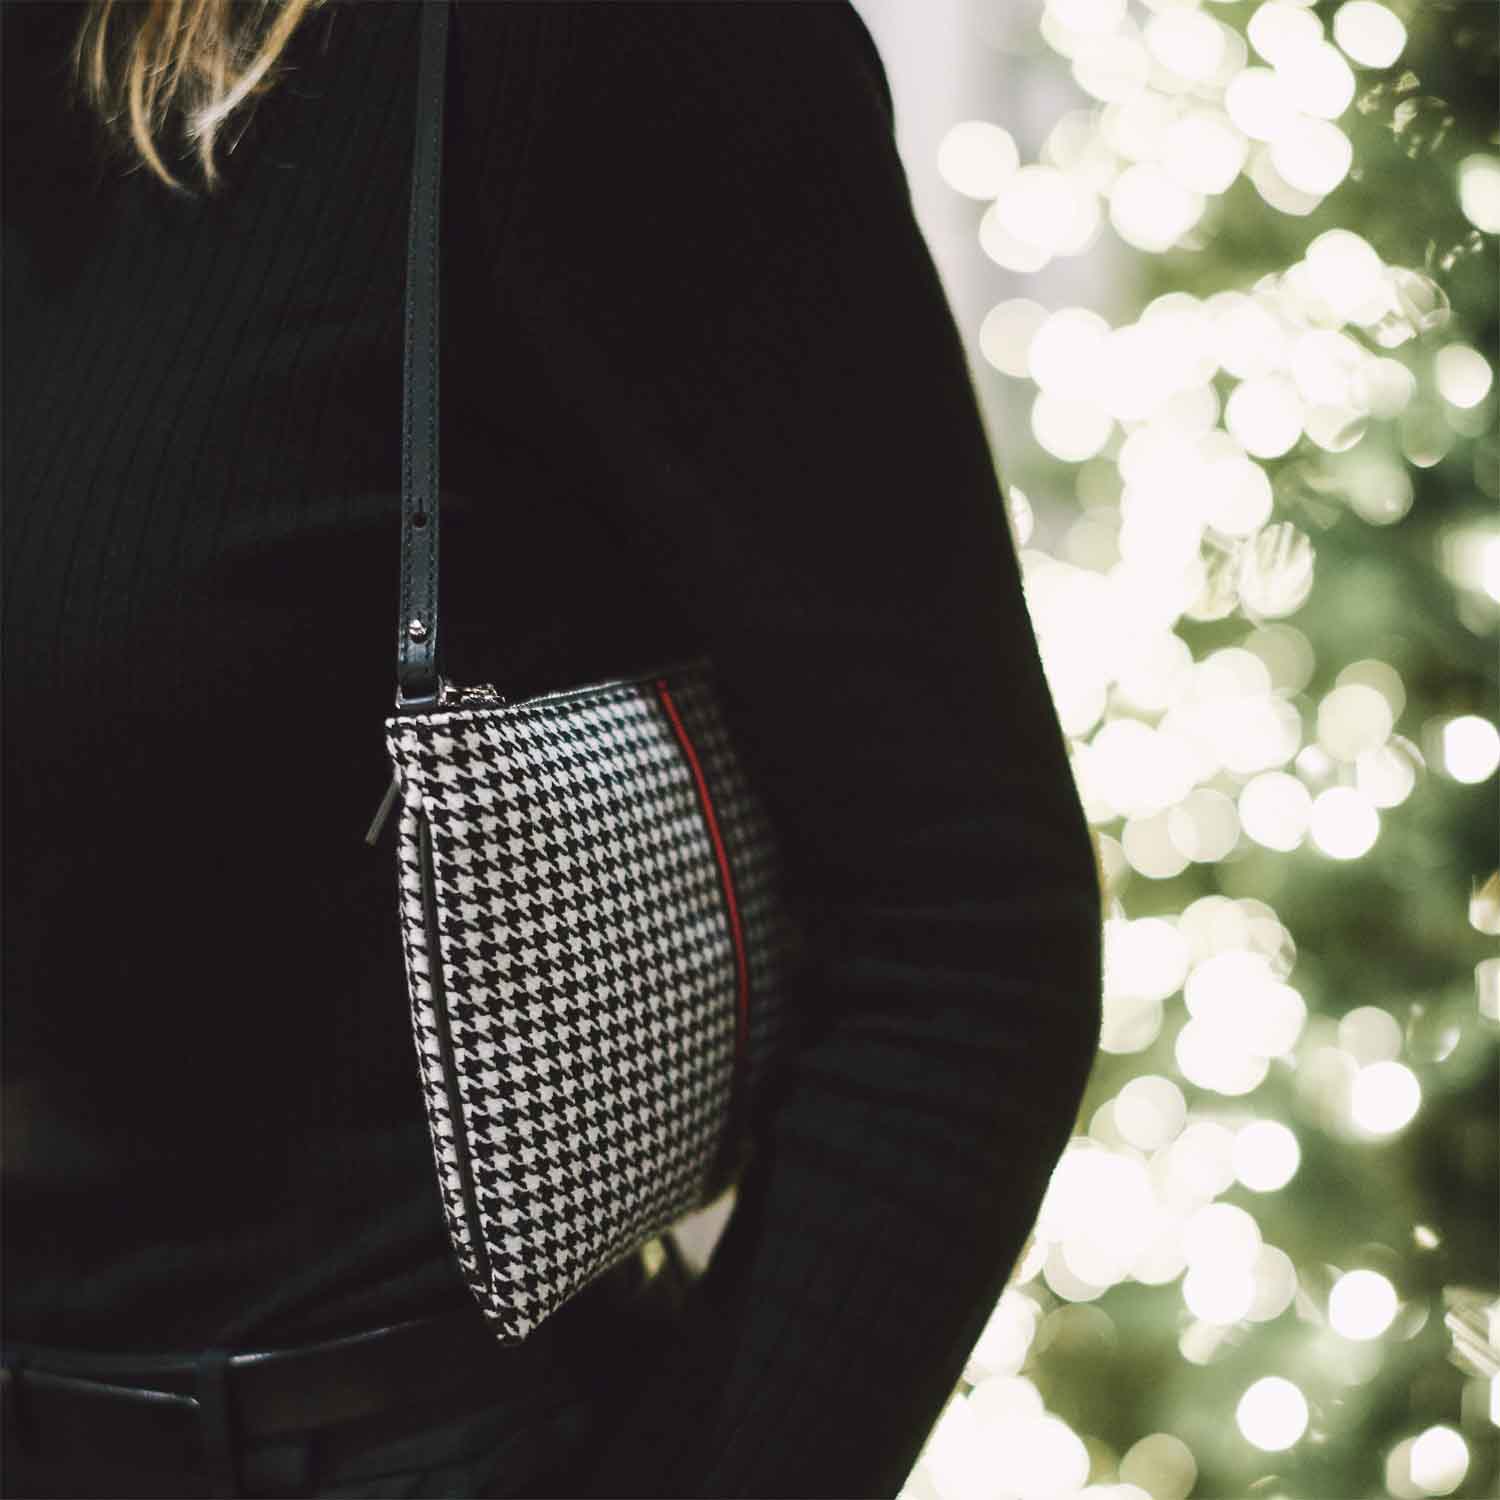 Gallia-S Clutch Wool Houndstooth and Leather